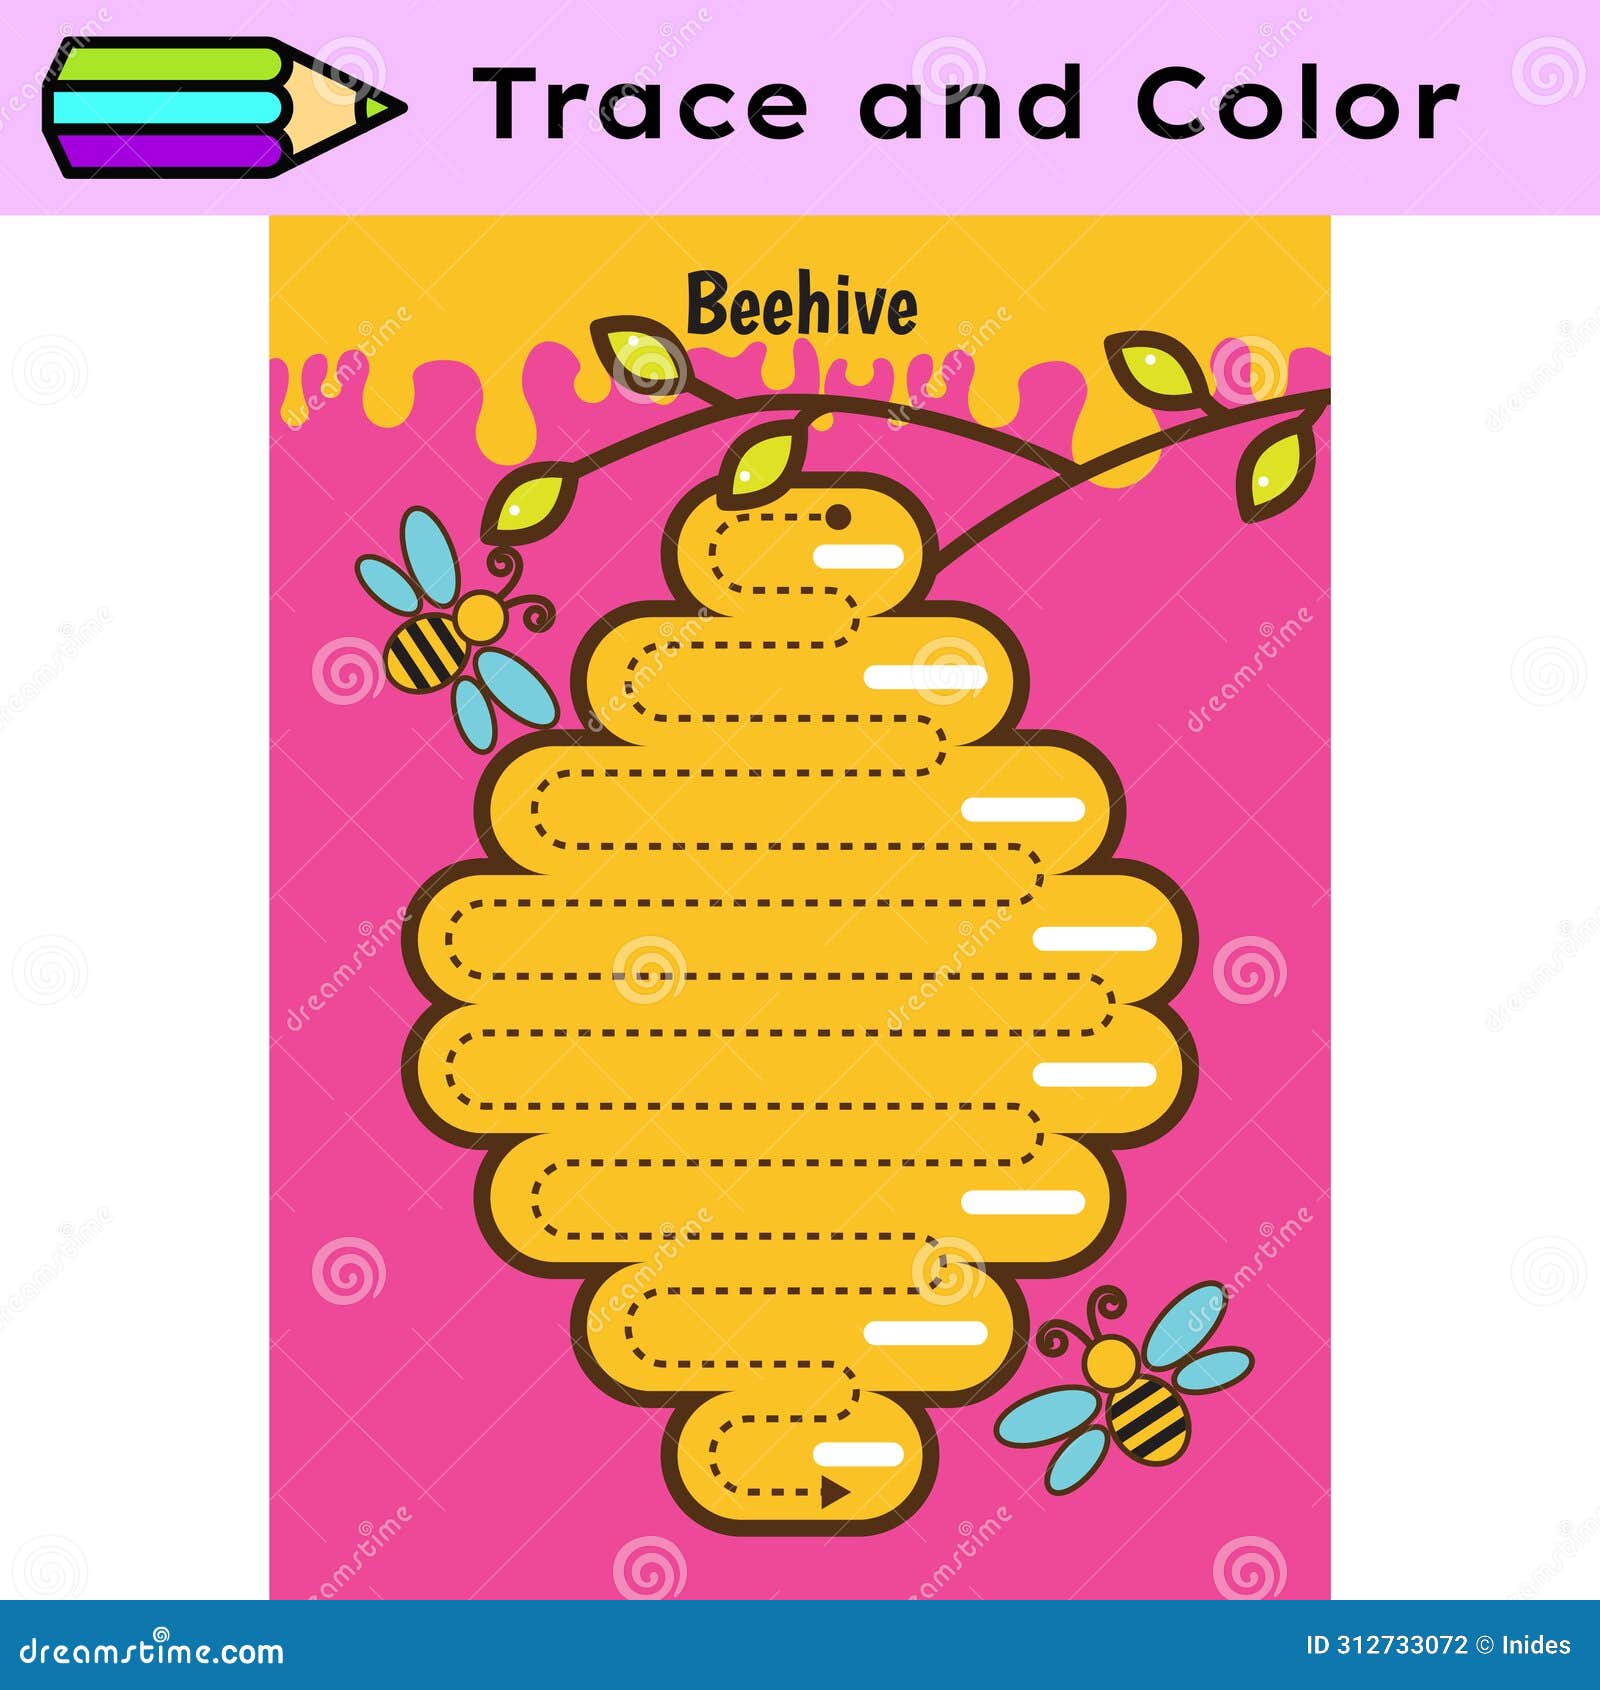 pen tracing lines activity worksheet for children. pencil control for kids practicing motoric skills. beehive